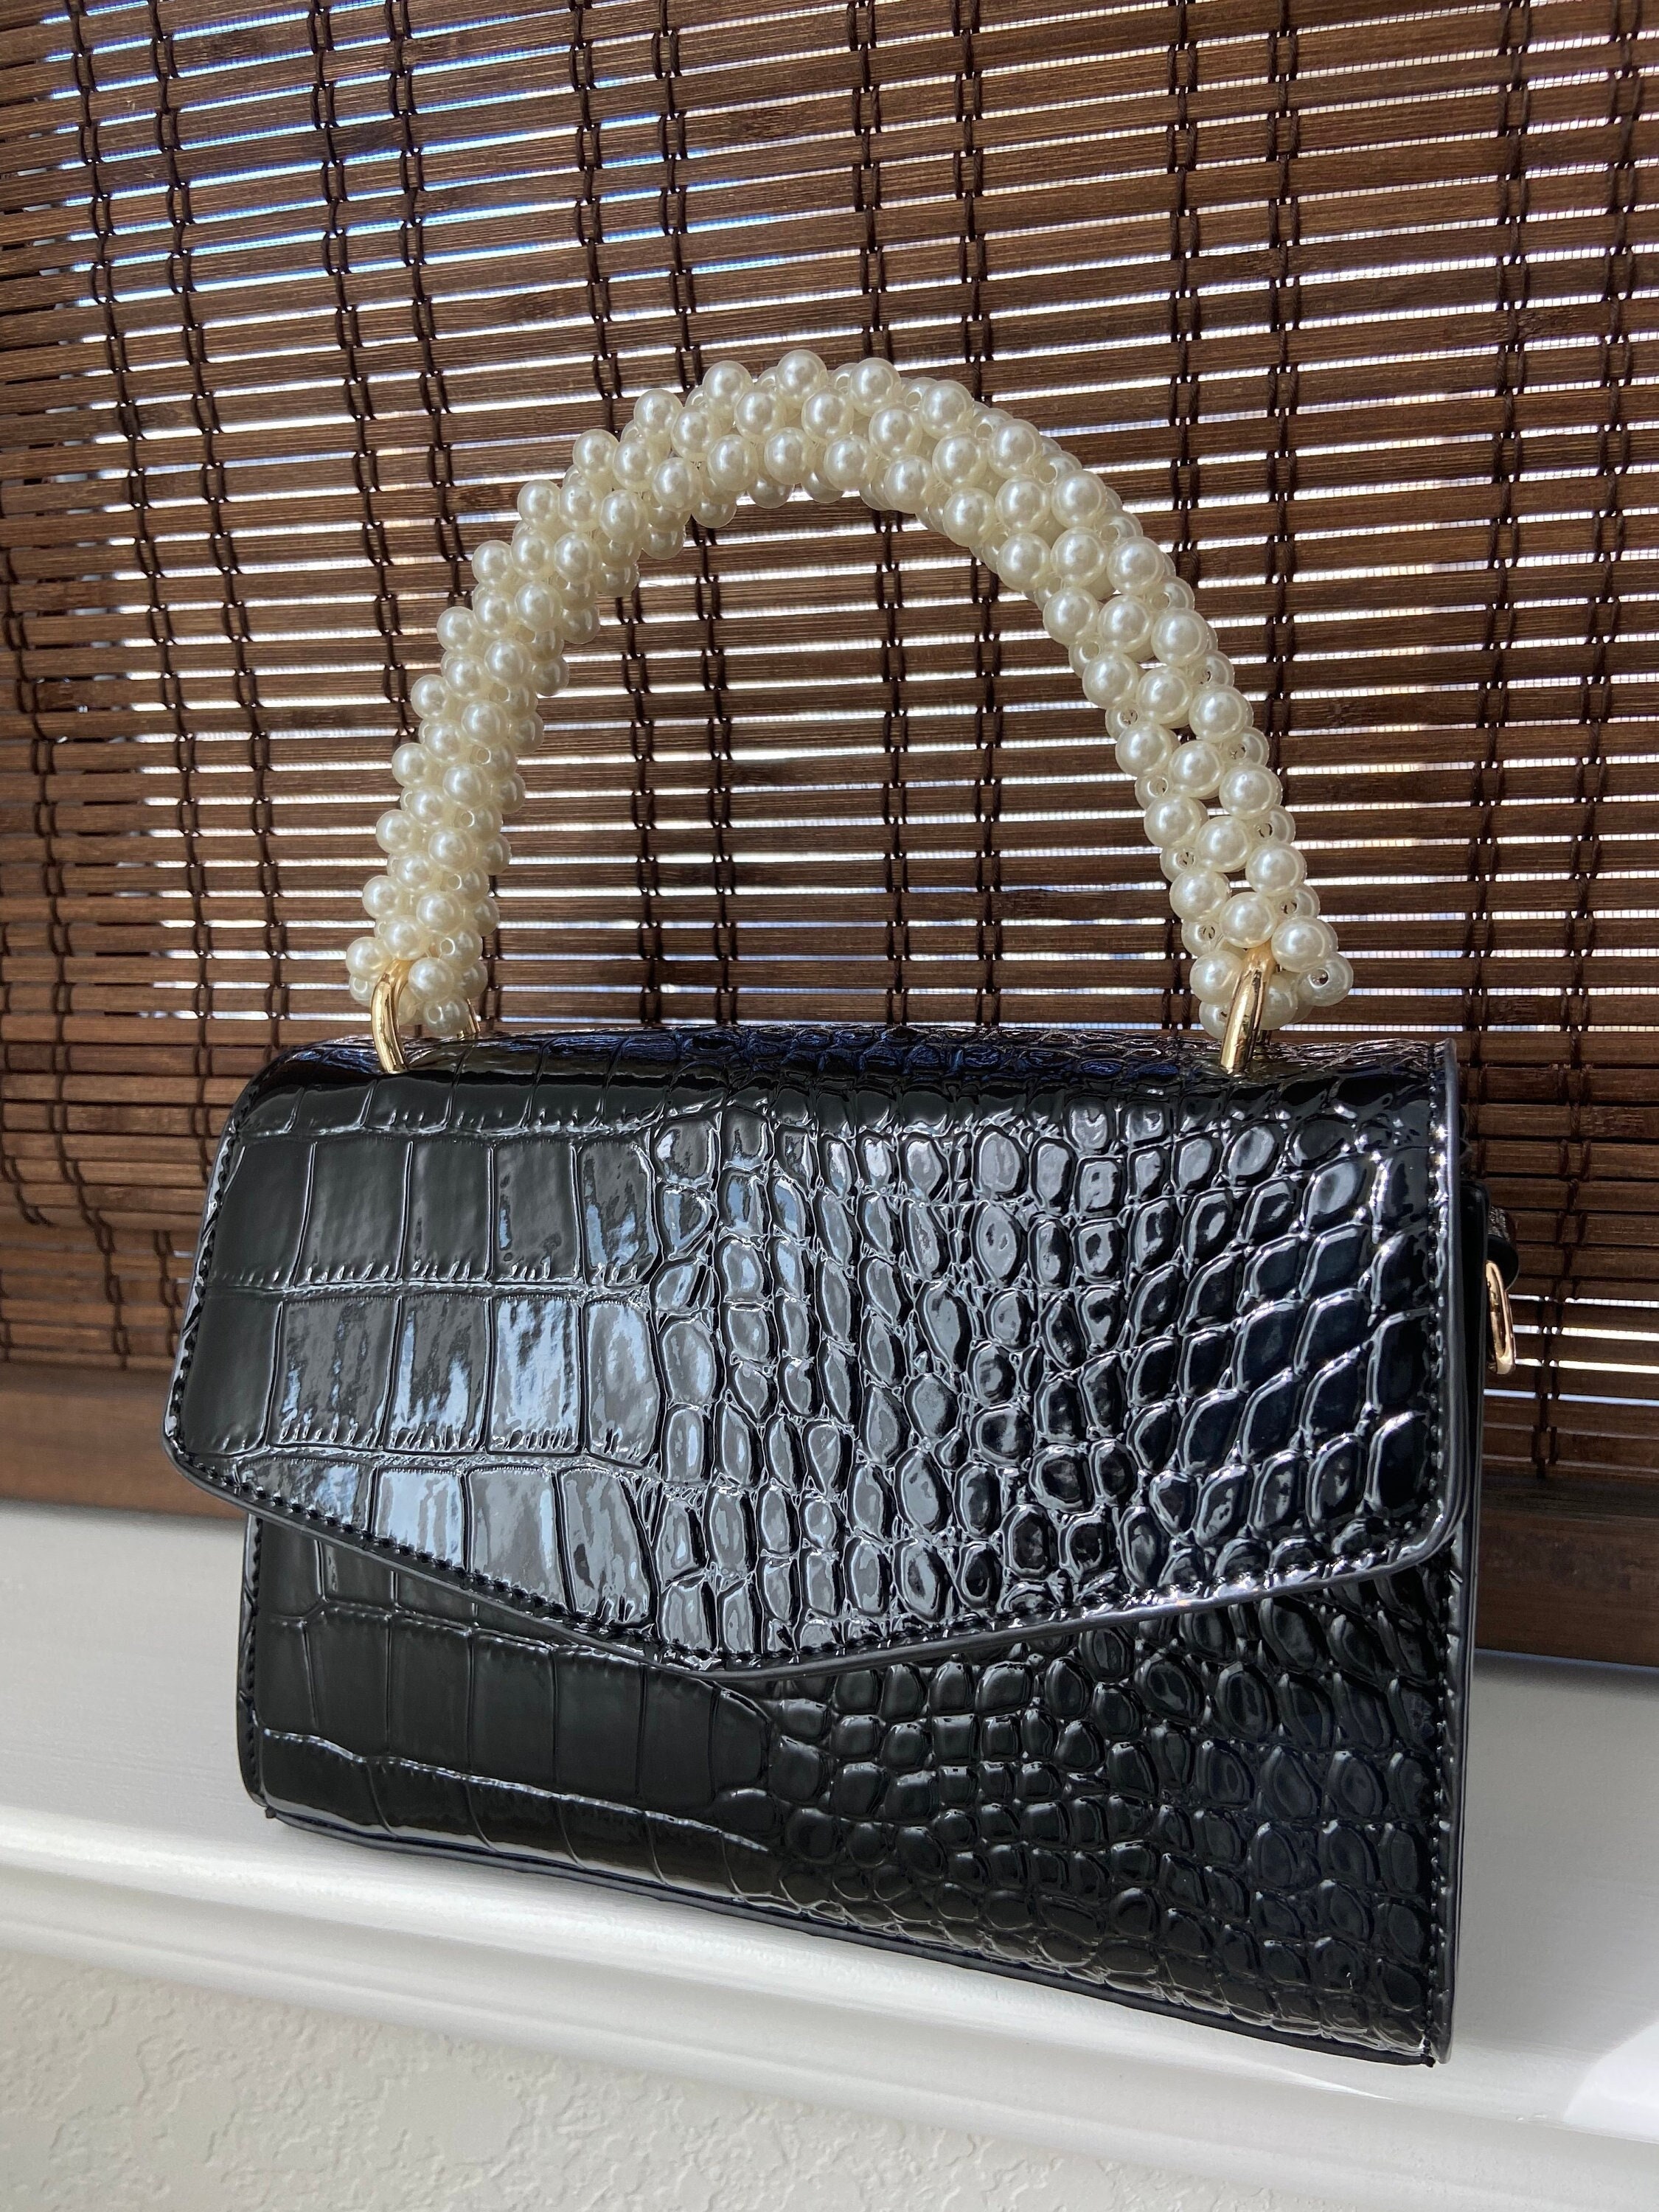 Patent Crocodile Buckle Bag with Scarf - Lavender